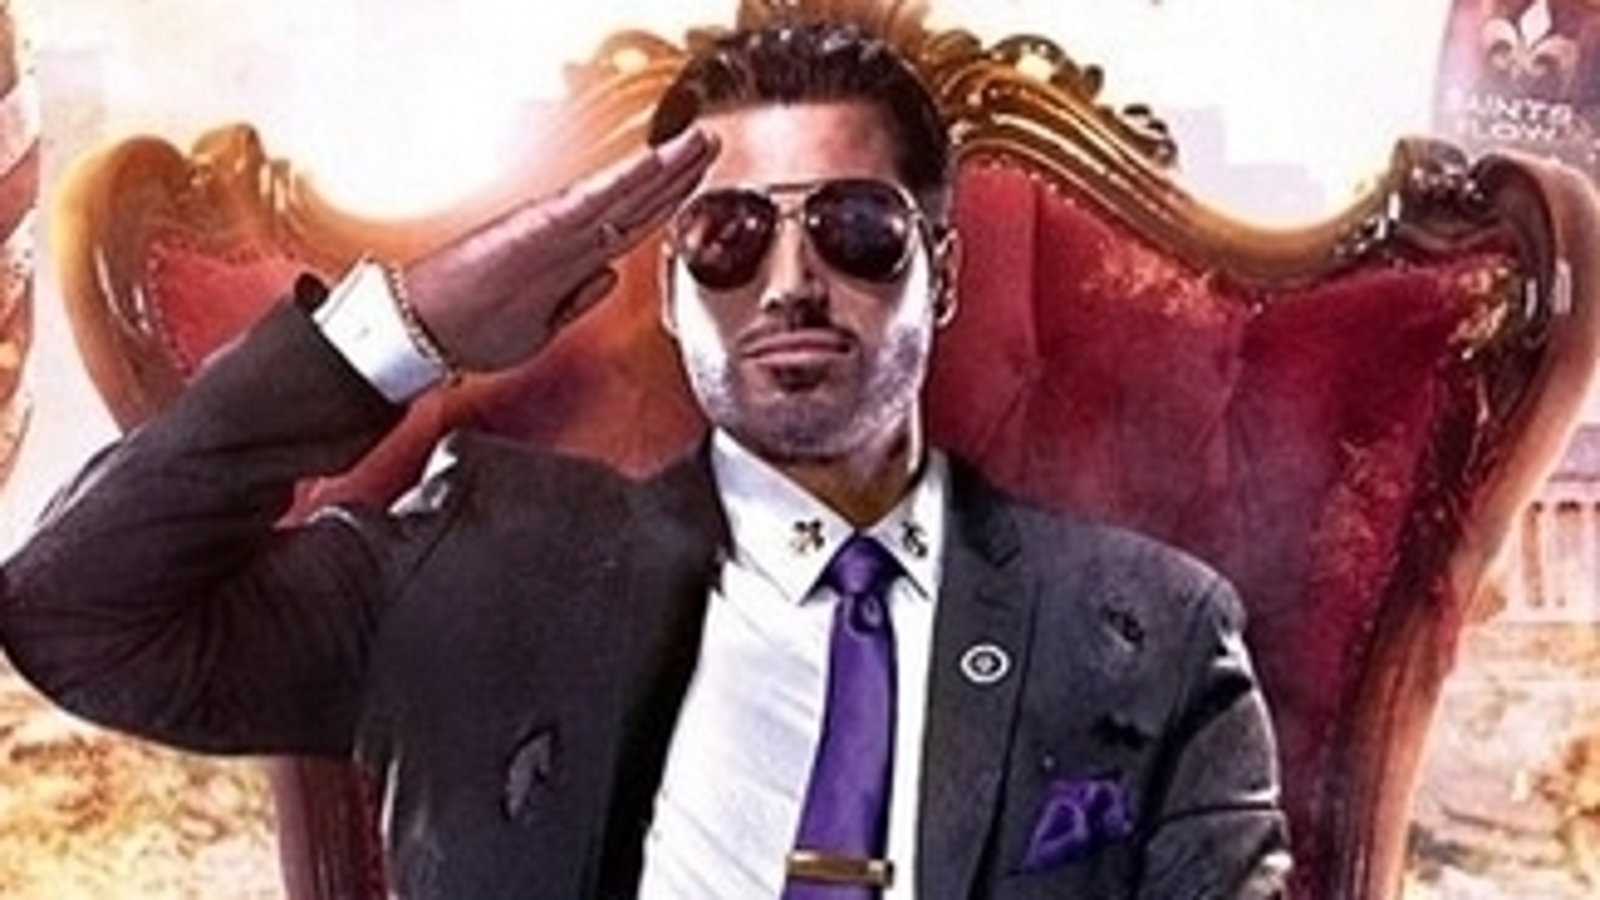 Saints Row The Third - Full Package - Nintendo Switch